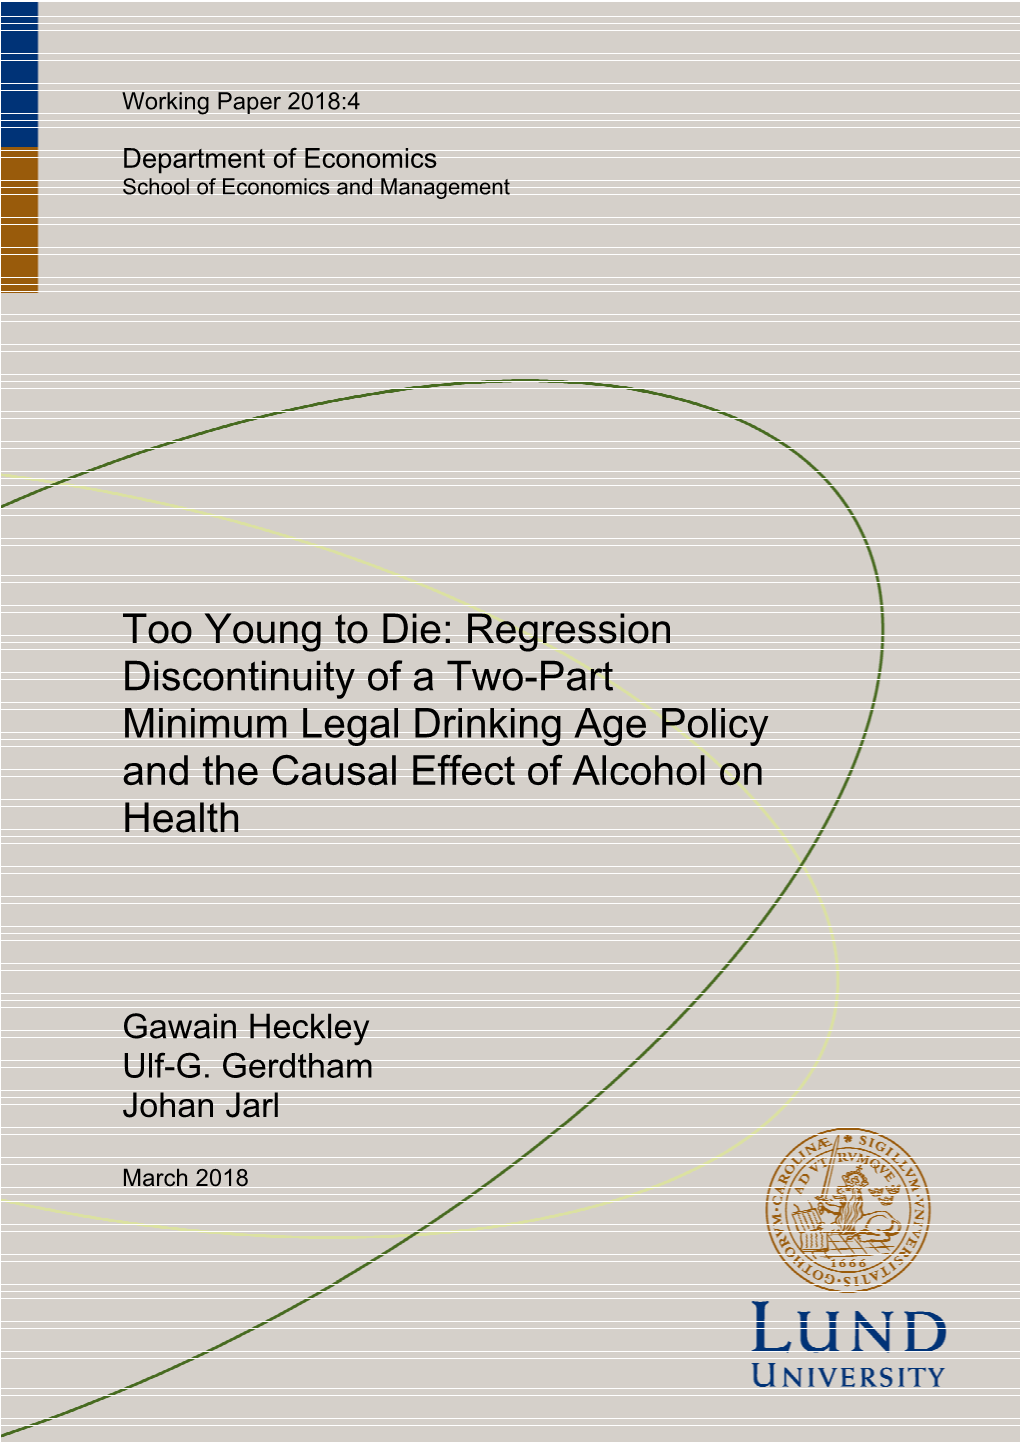 Too Young to Die: Regression Discontinuity of a Two-Part Minimum Legal Drinking Age Policy and the Causal Effect of Alcohol on Health